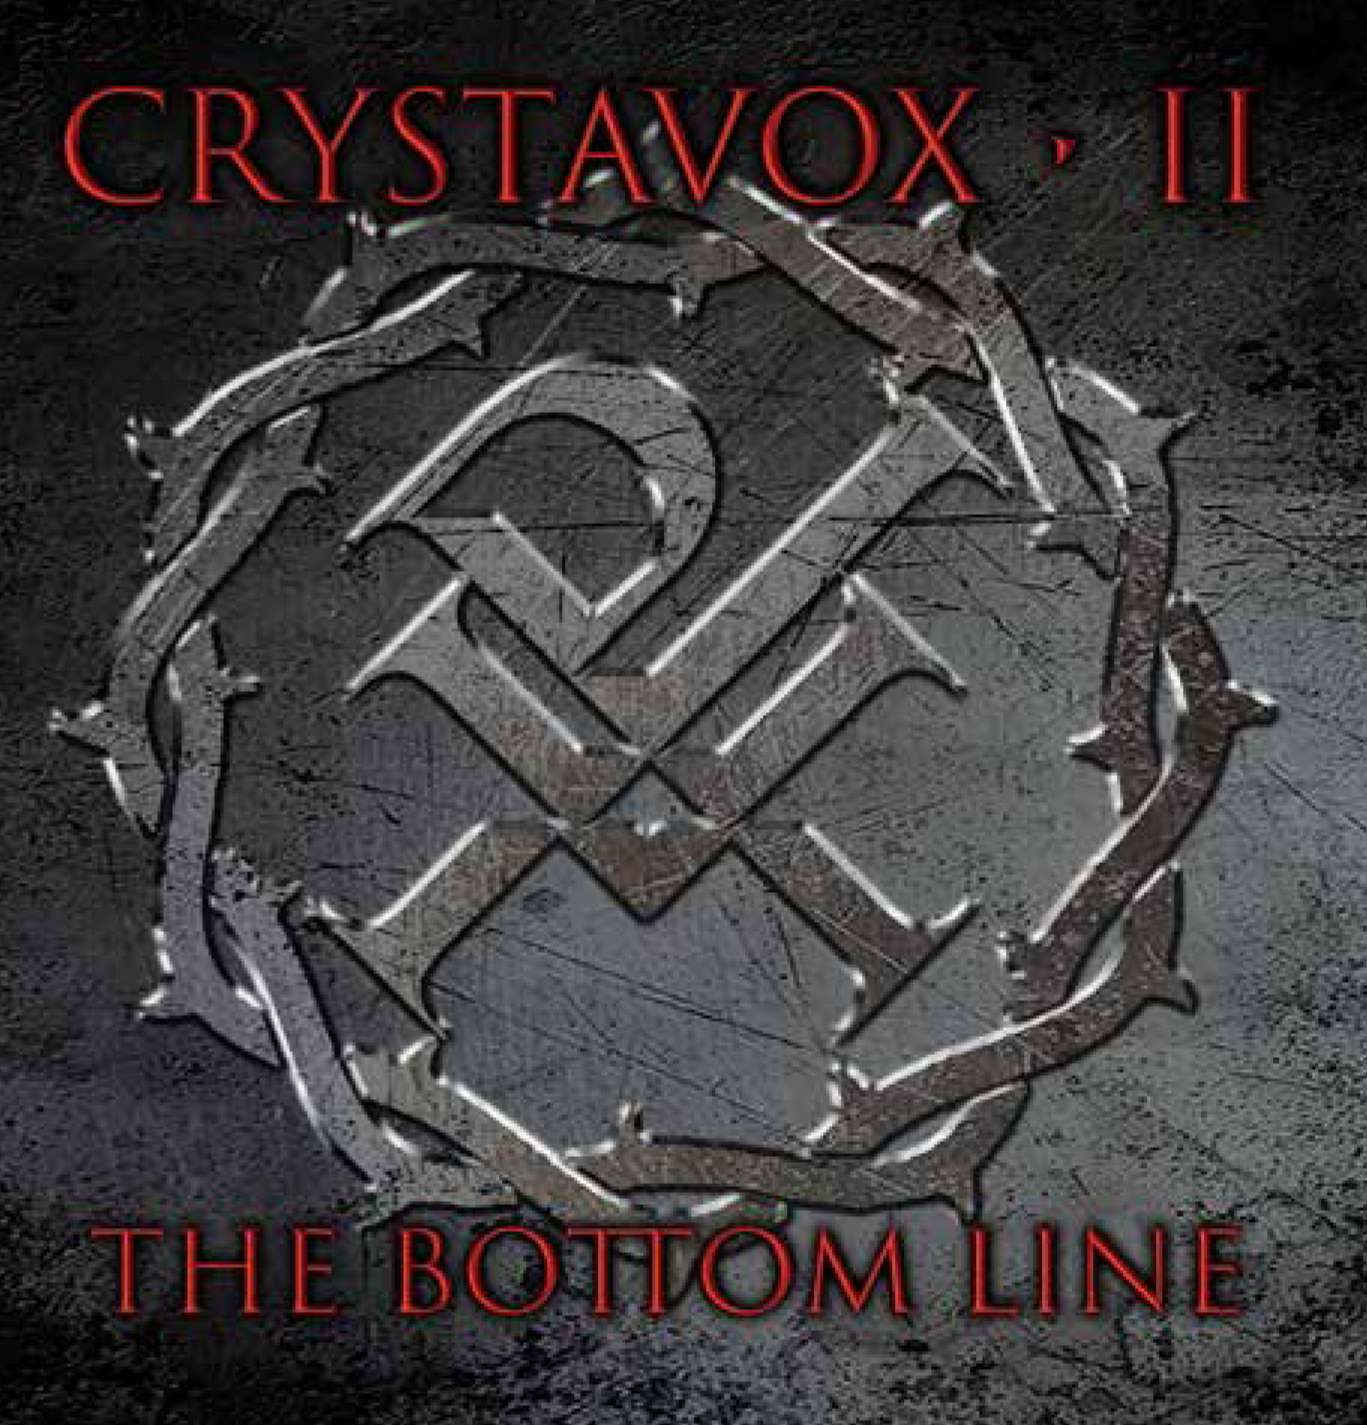 Crystavox the bottom line - great melodic metal